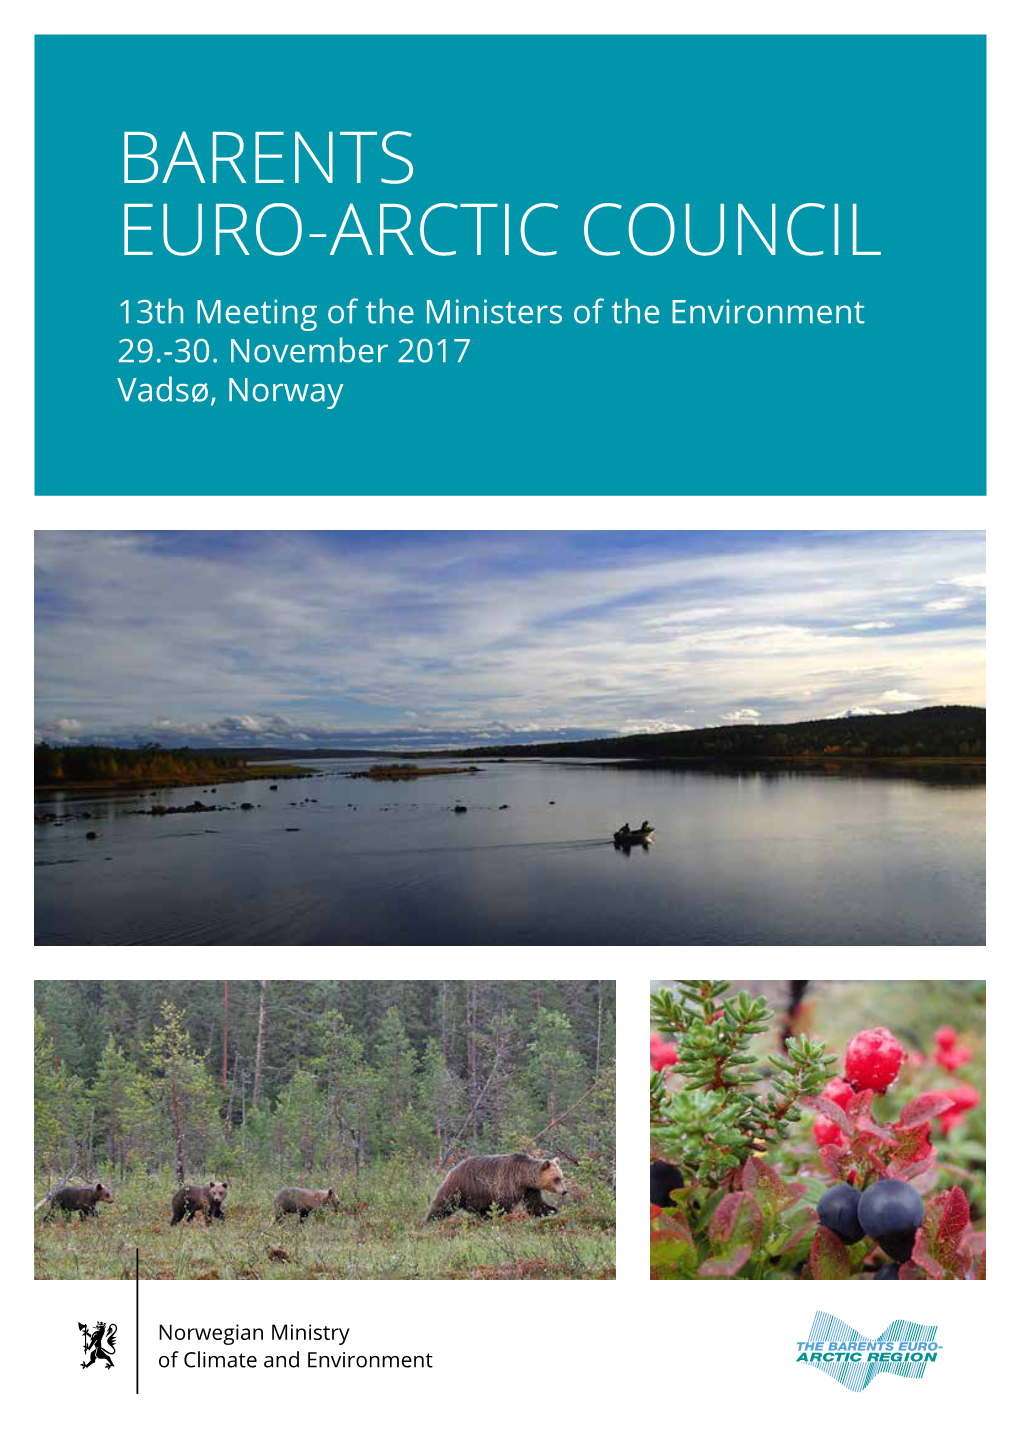 BARENTS EURO-ARCTIC COUNCIL 13Th Meeting of the Ministers of the Environment 29.-30